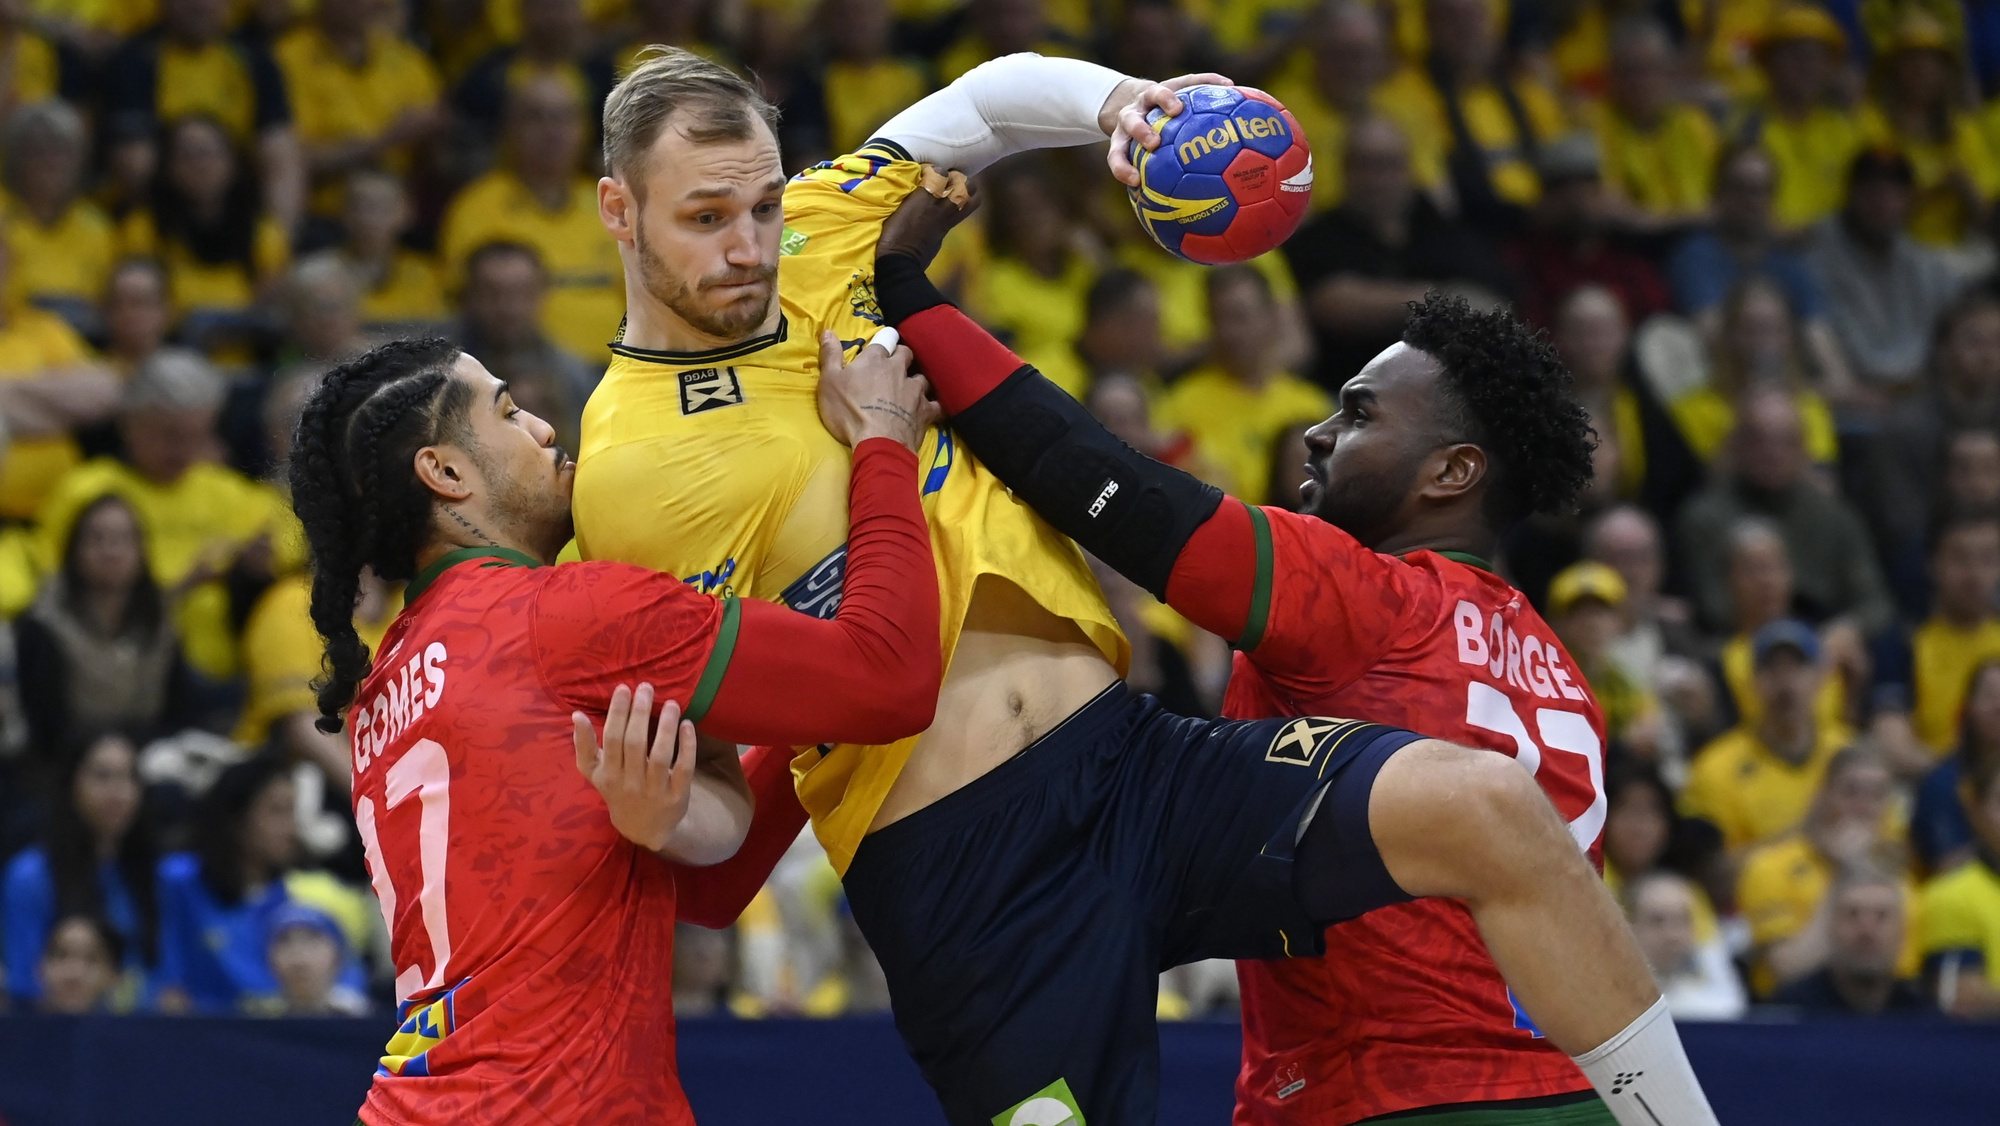 epa10423863 Sweden&#039;s Lukas Sandell (C) in action against Portugal&#039;s Andre Gomes (L) and Alexis Borges during the IHF Men&#039;s Handball World Championship Main Round group II third round match Sweden vs Portugal in Gothenburg, Sweden, 22 January 2023.  EPA/Tamas Kovacs HUNGARY OUT